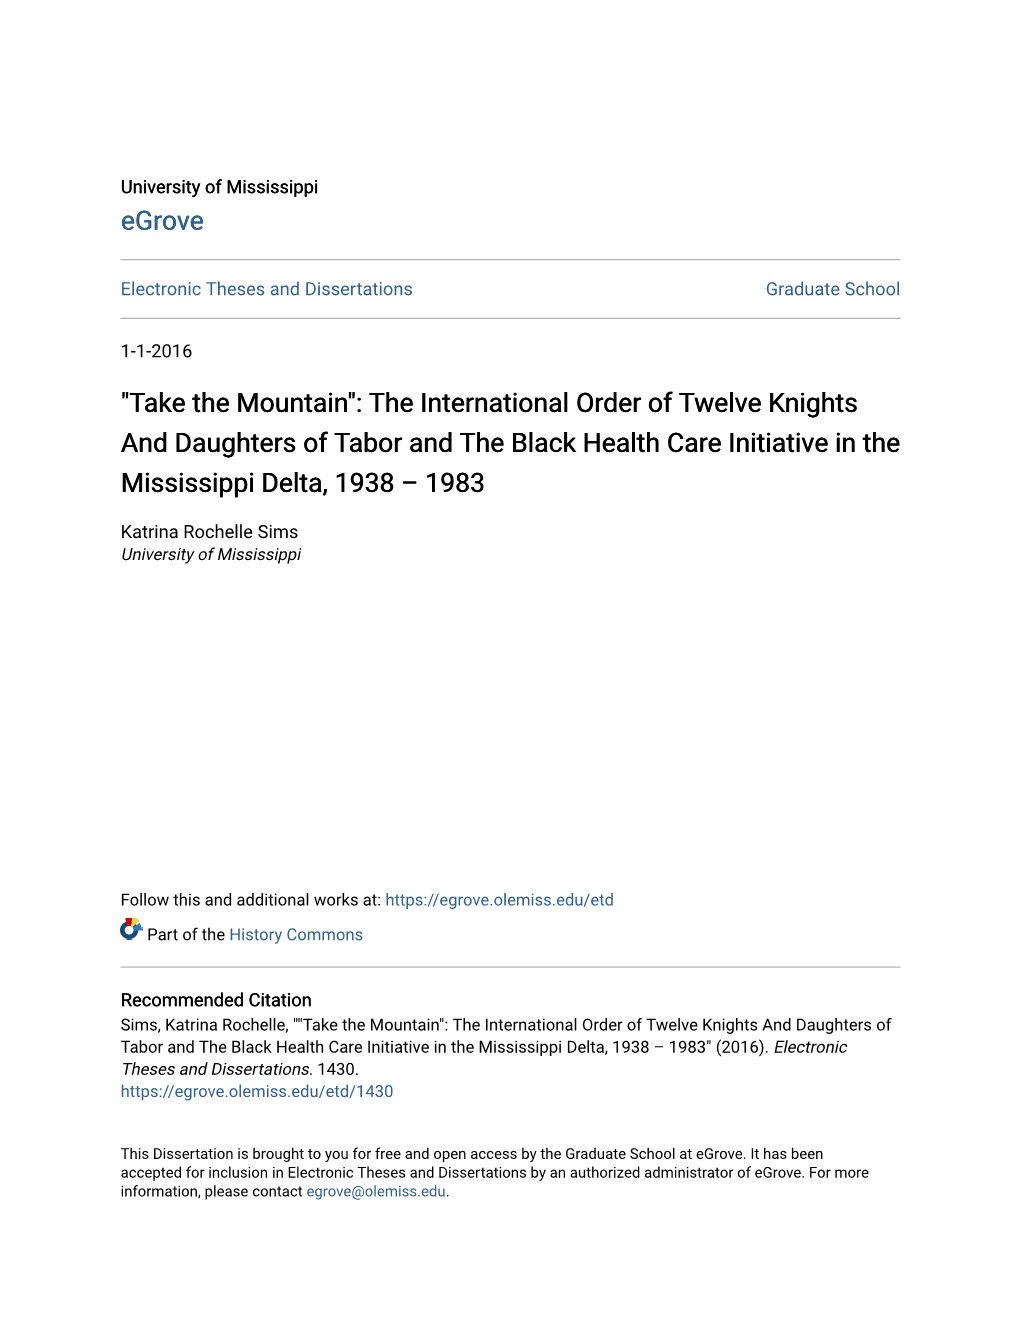 The International Order of Twelve Knights and Daughters of Tabor and the Black Health Care Initiative in the Mississippi Delta, 1938 – 1983